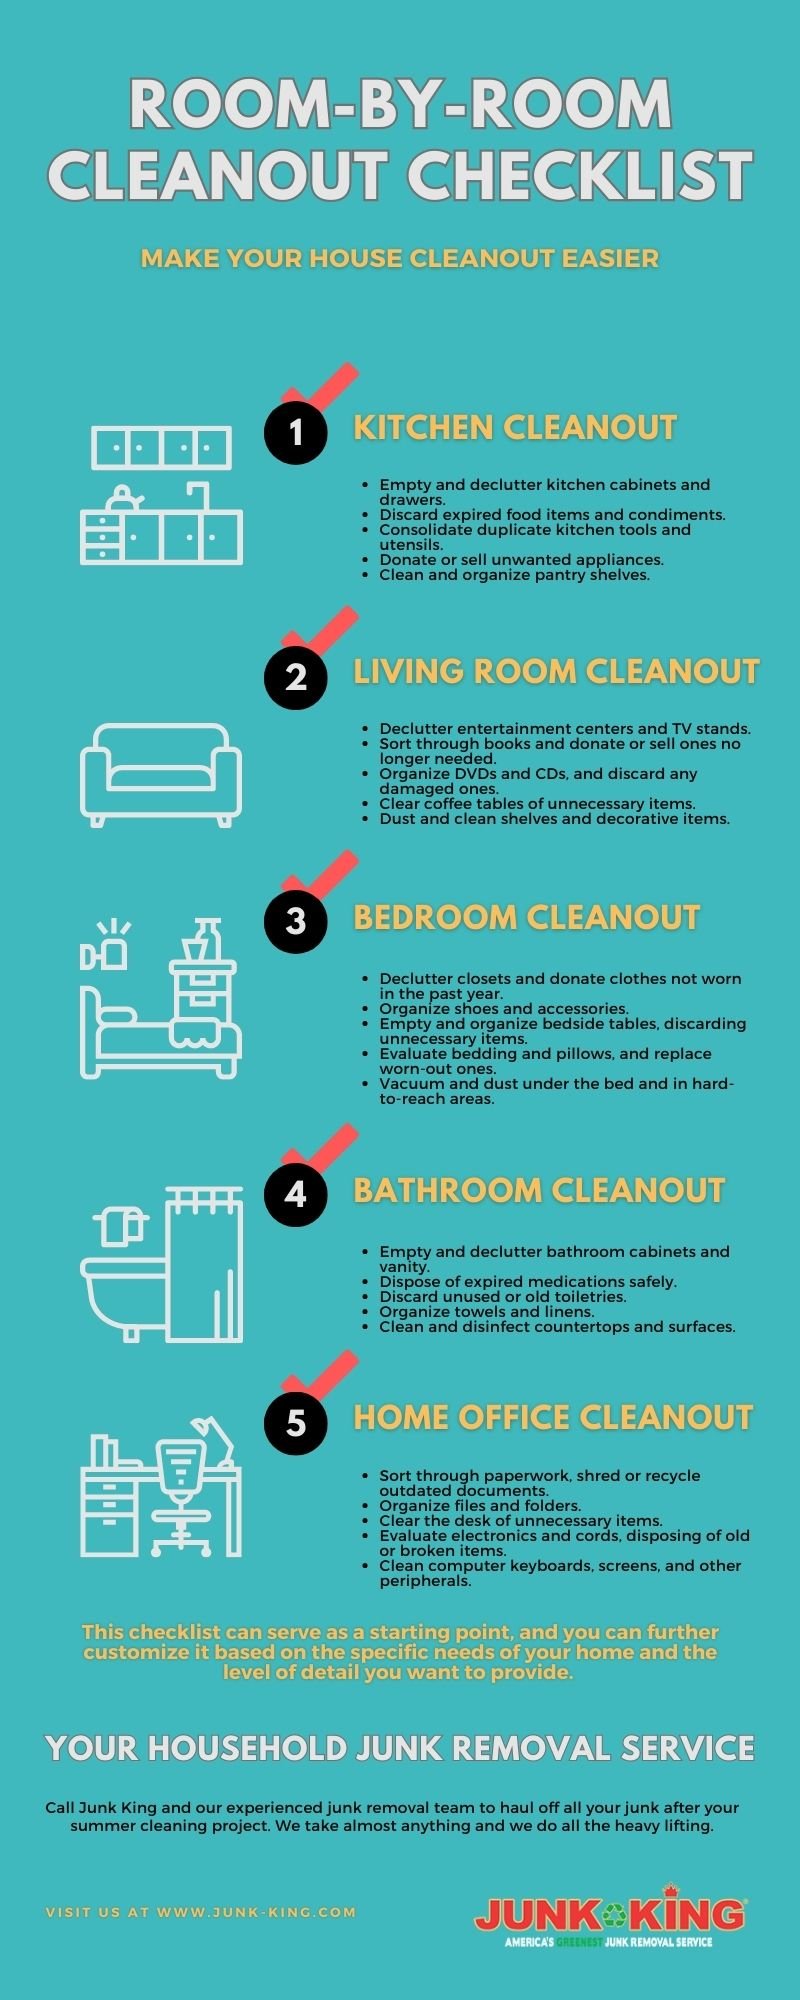 Room-By-Room Cleanout Checklist